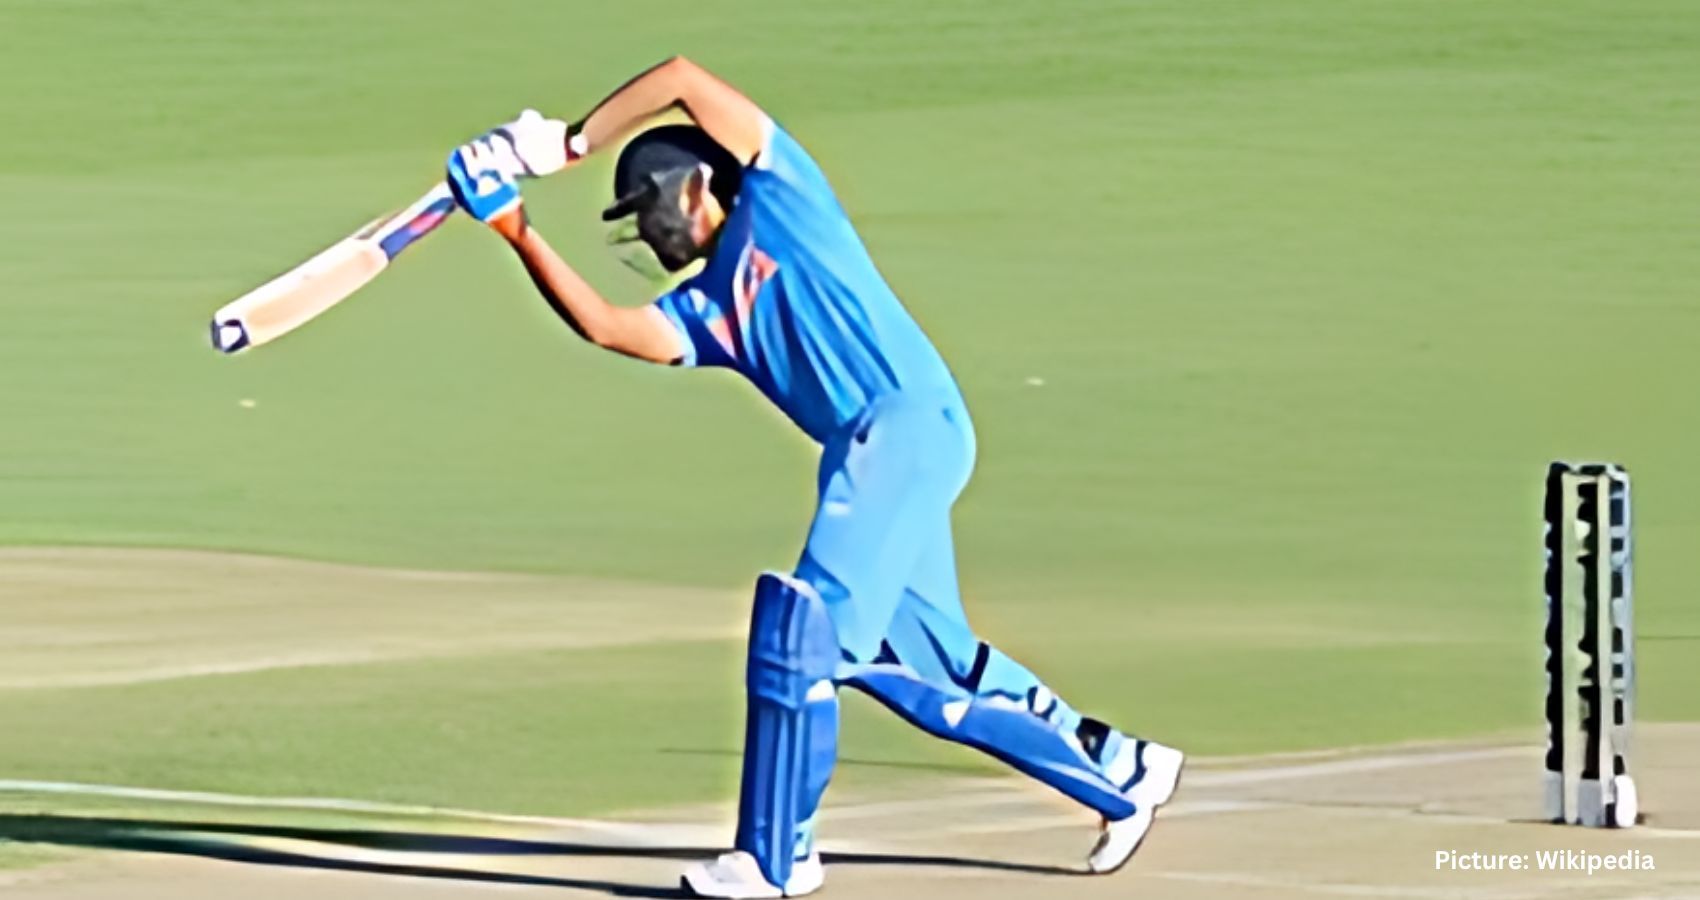 Featured & Cover Rohit Sharma Ignites Victory for India with Record Breaking Half Century Against Ireland in T20 World Cup